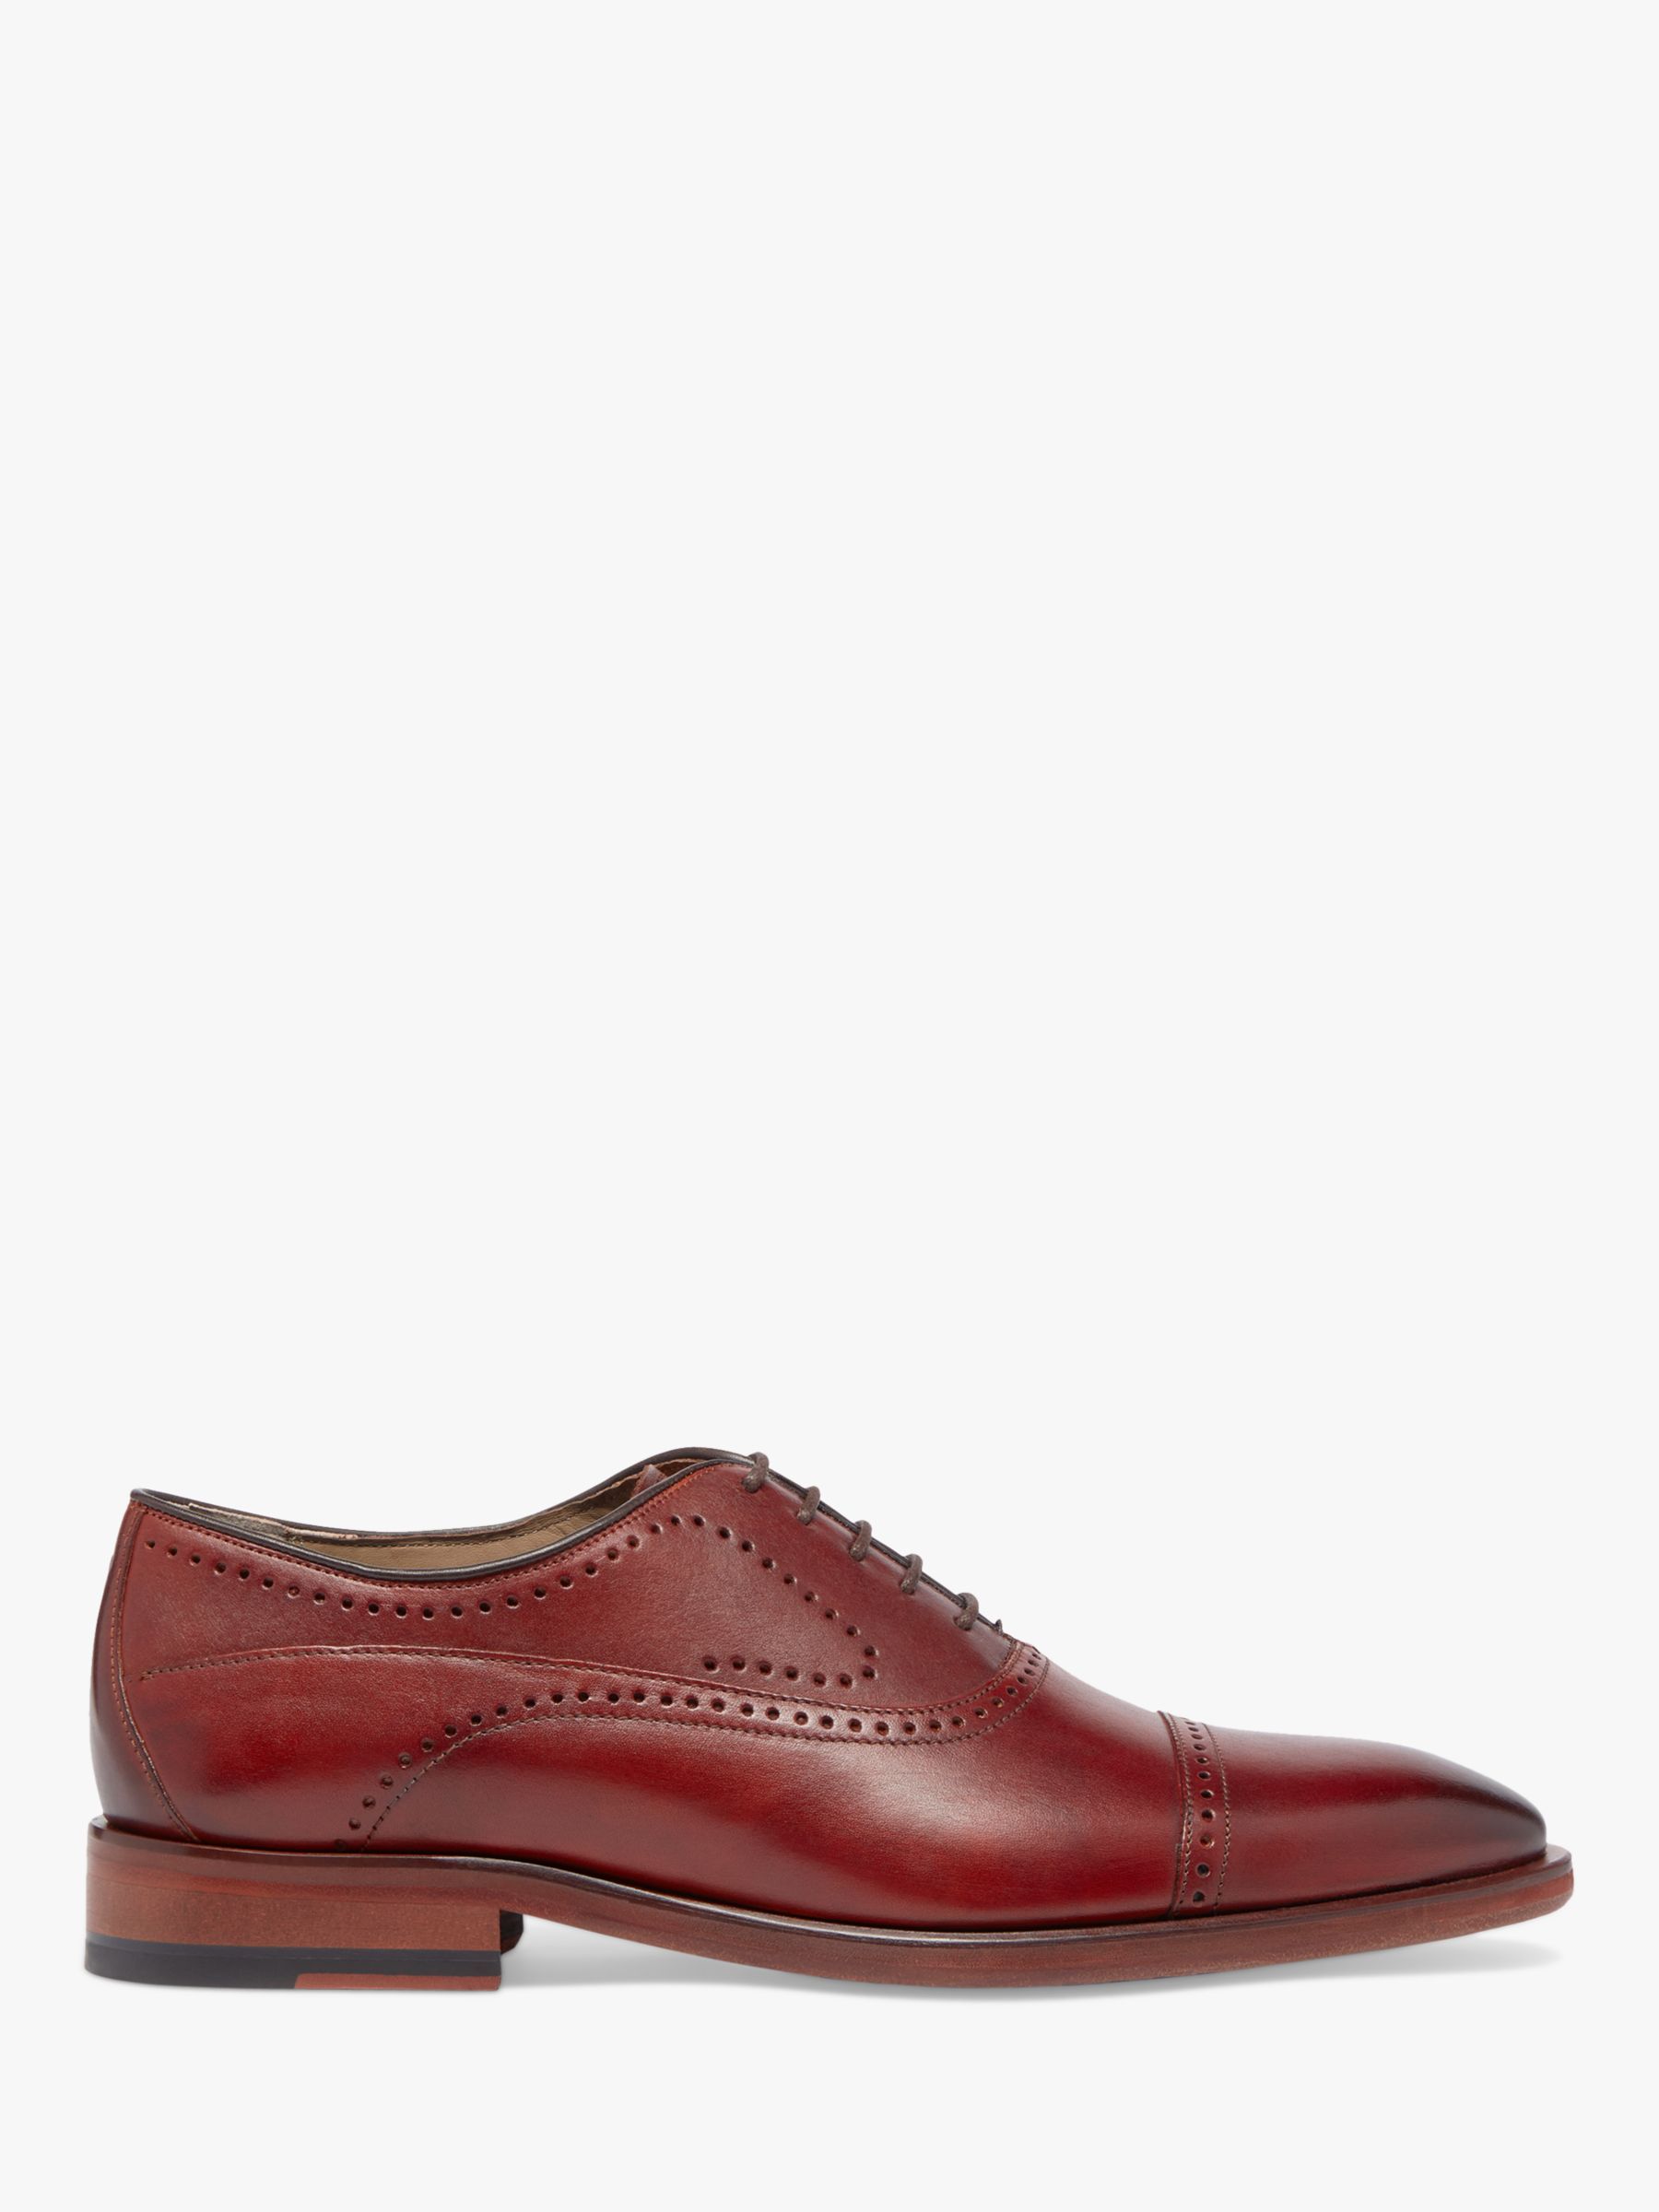 Oliver Sweeney Mallory Oxford Shoes, Tan at John Lewis & Partners